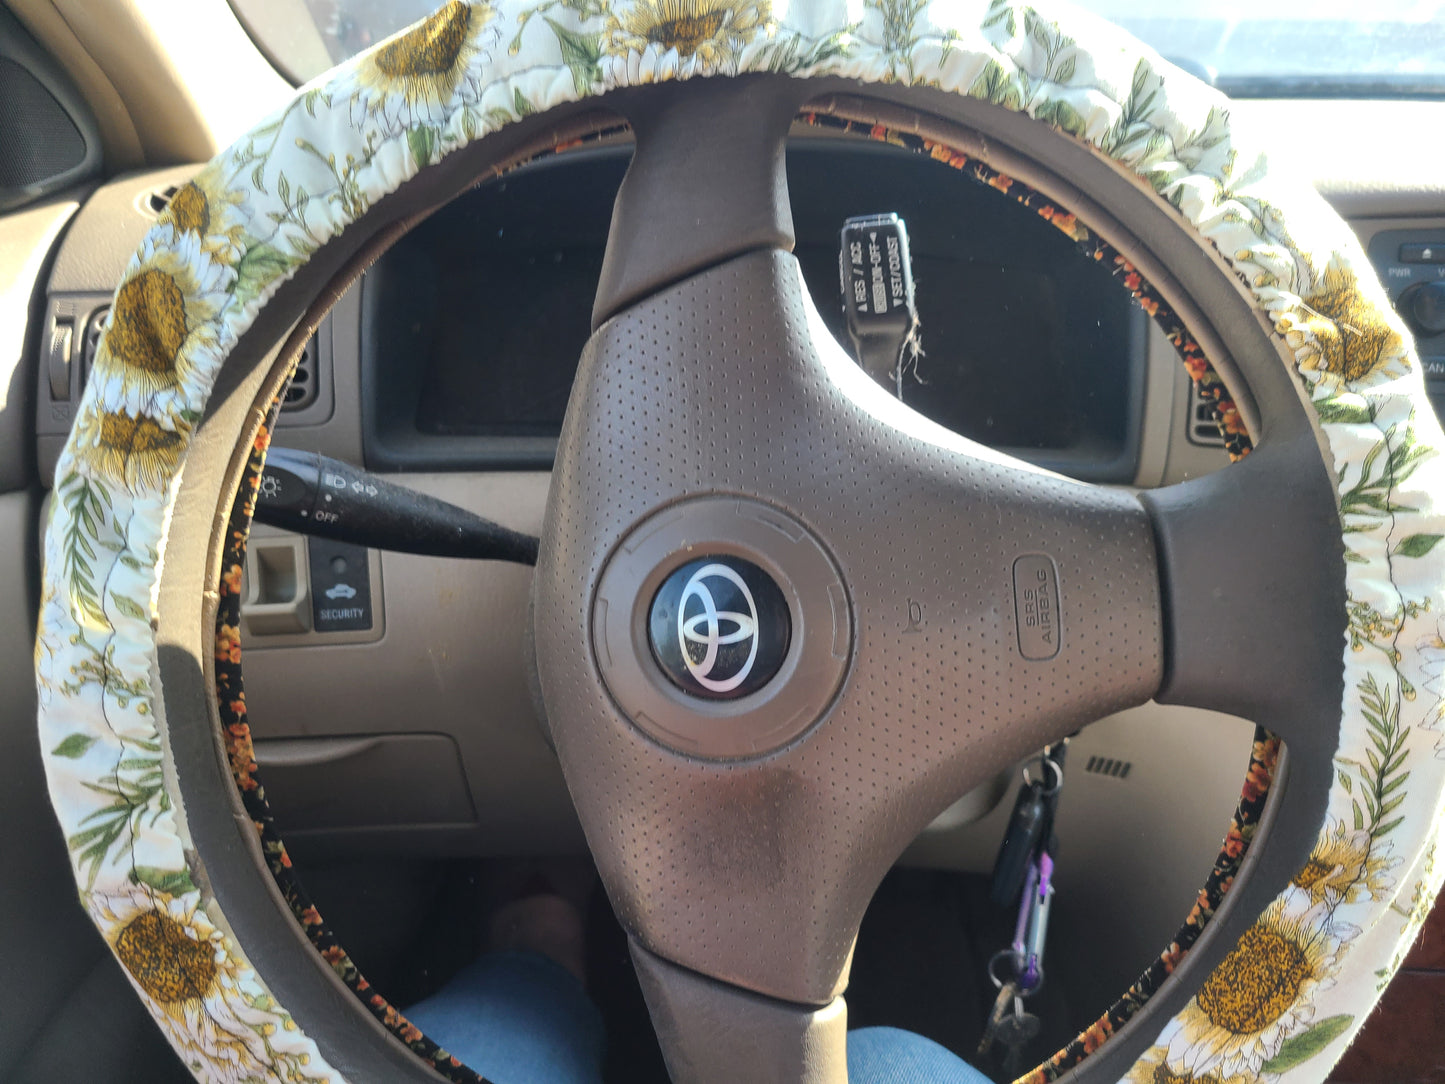 Sunflower Steering Wheel Cover, 100% Cotton, Washable, Custom Car Accessories - Harlow's Store and Garden Gifts